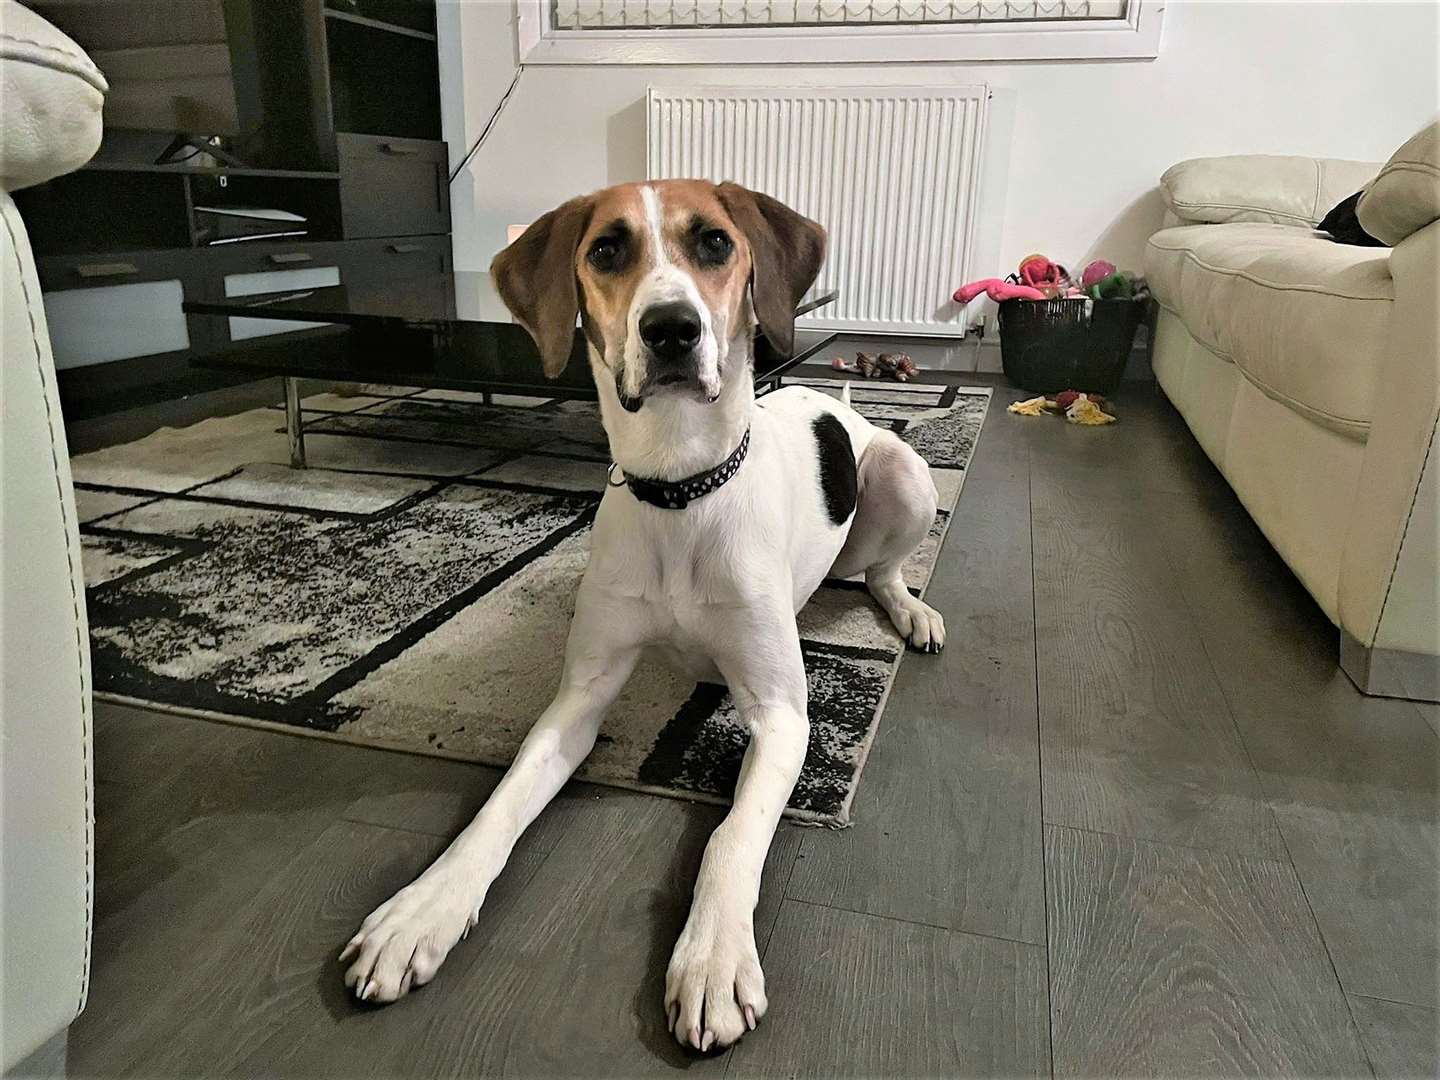 Daisy the foxhound was bred as part of the multimillion low-welfare puppy trade. Picture: SSPCA